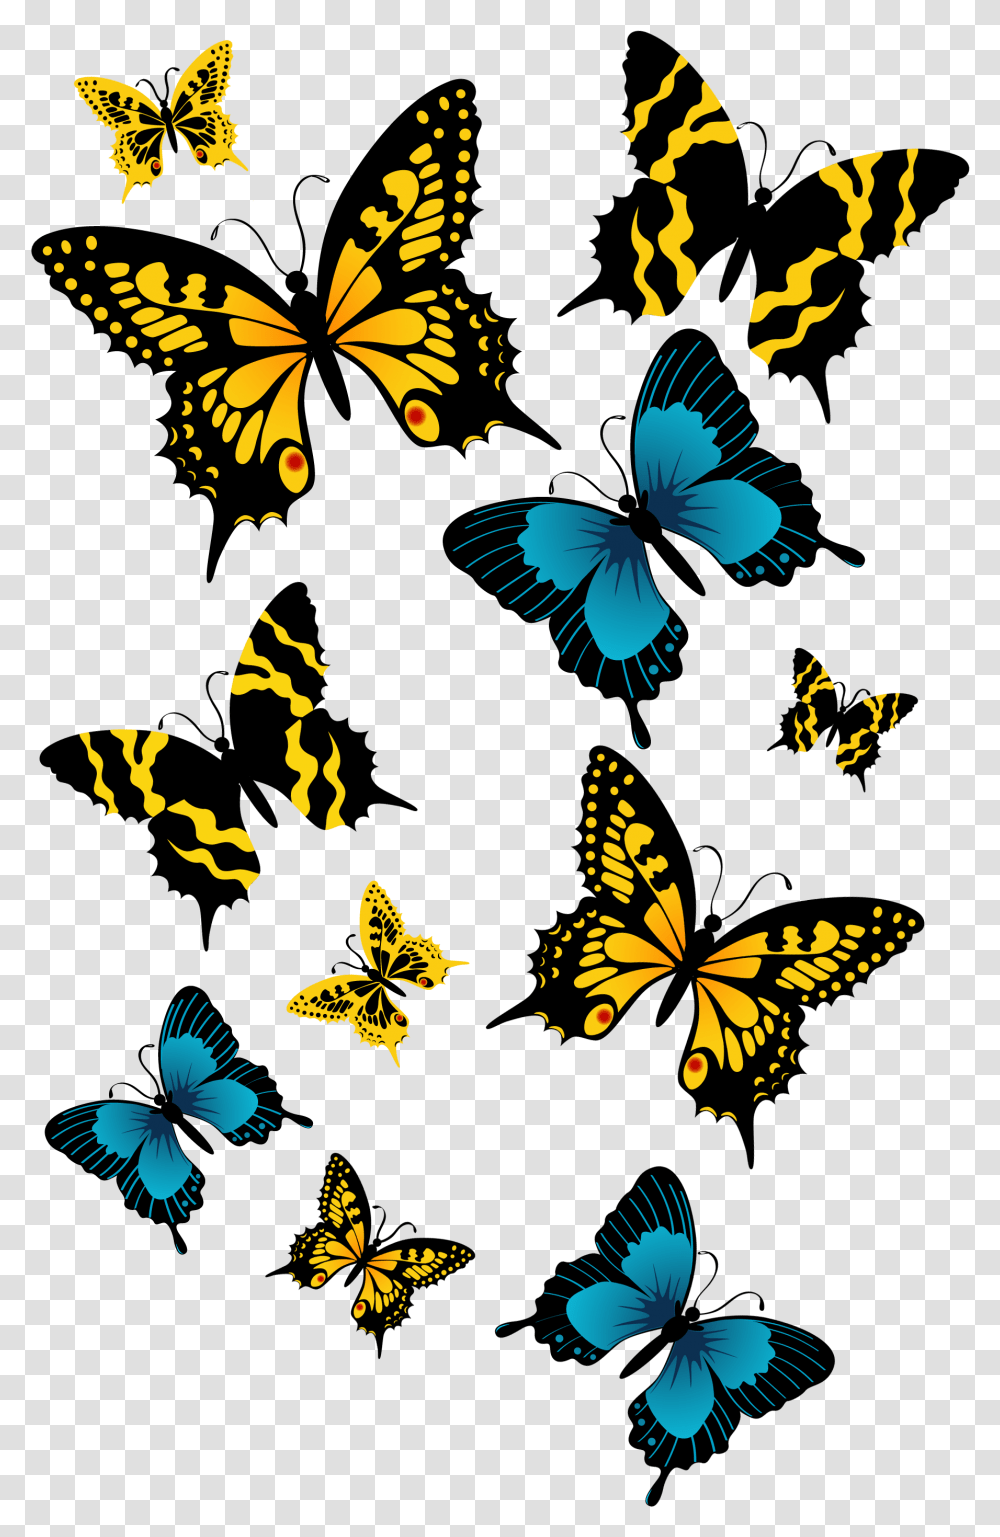 Butterflies High Quality Image Beautiful Hd Butterfly, Insect, Invertebrate, Animal, Monarch Transparent Png